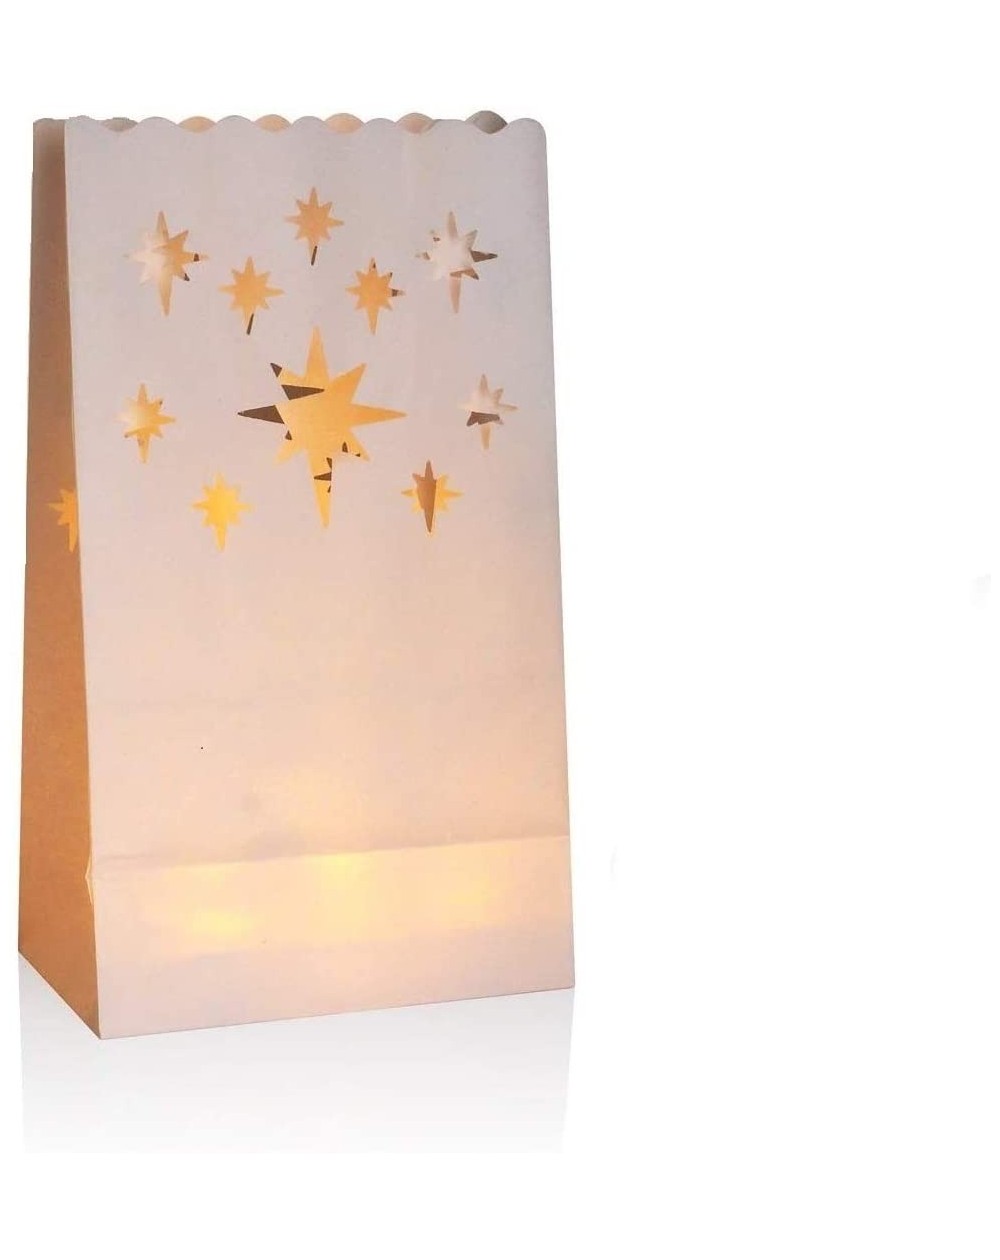 Luminarias JT 20 PCS White Luminary Bags- Flame Resistant Candle Bags Luminaries for Christmas- Wedding- Birthday Party- Tabl...